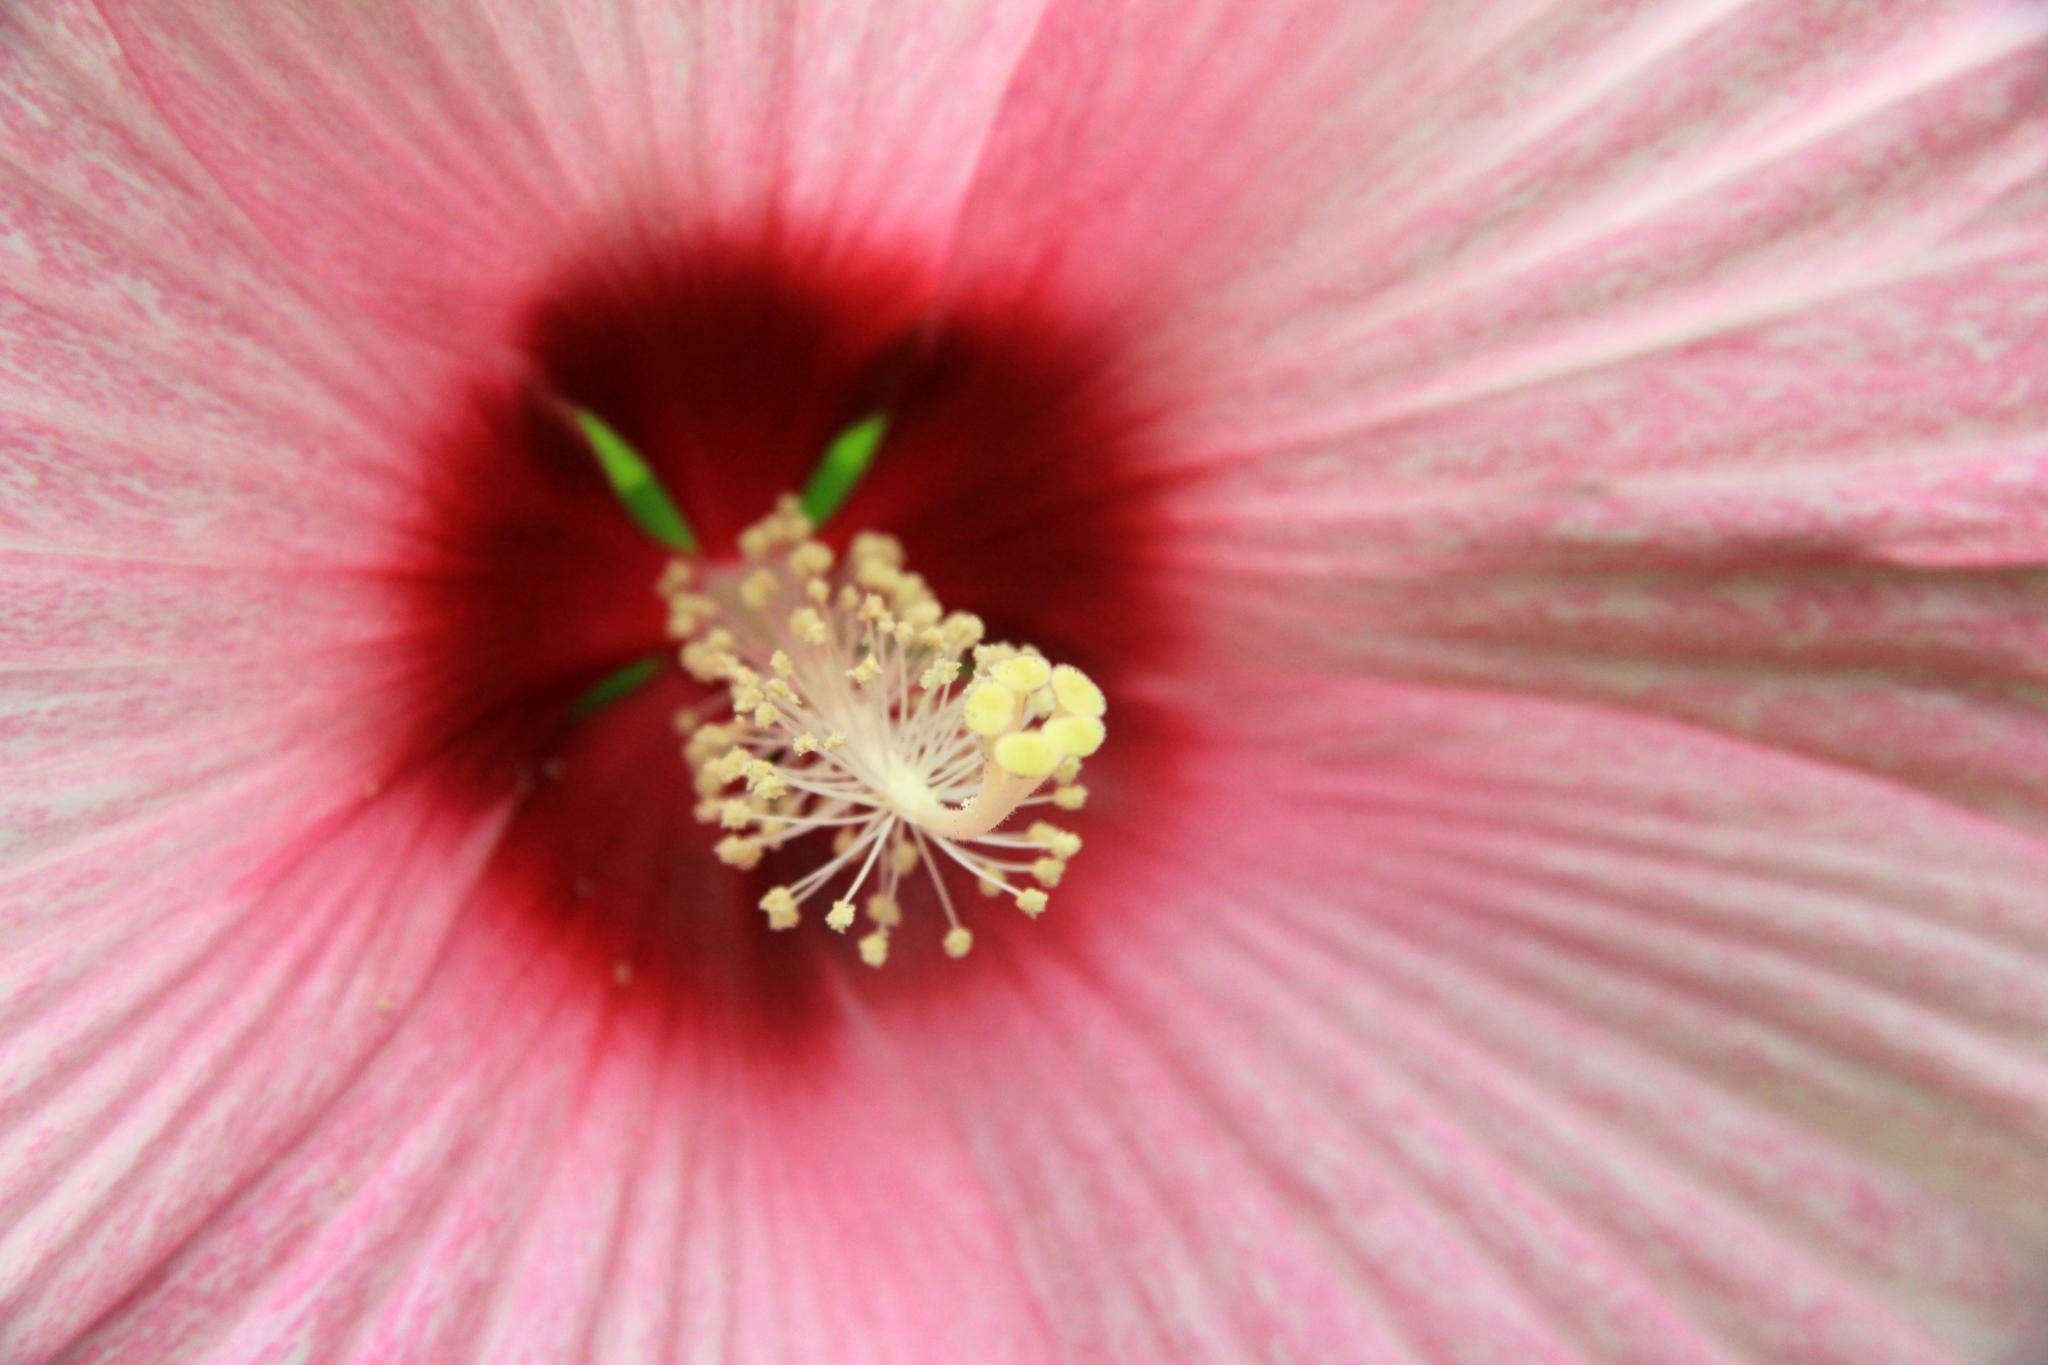 close up view of a pink flower with center flower